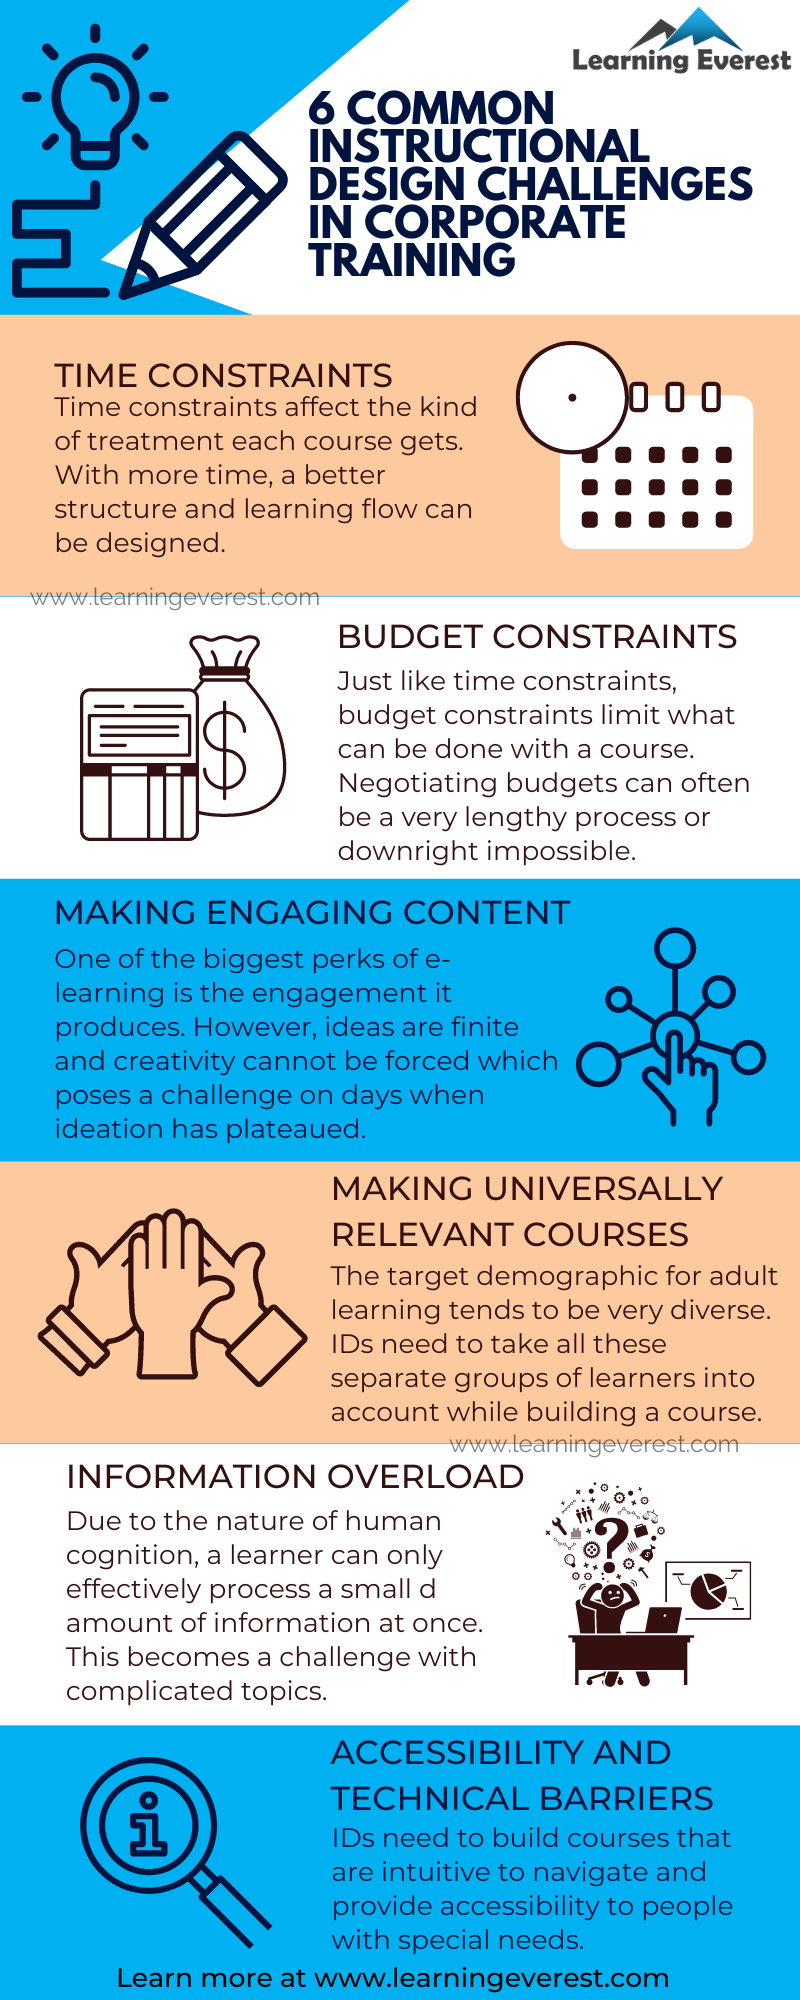 6 Common Instructional Design Challenges in Corporate Training Infographic